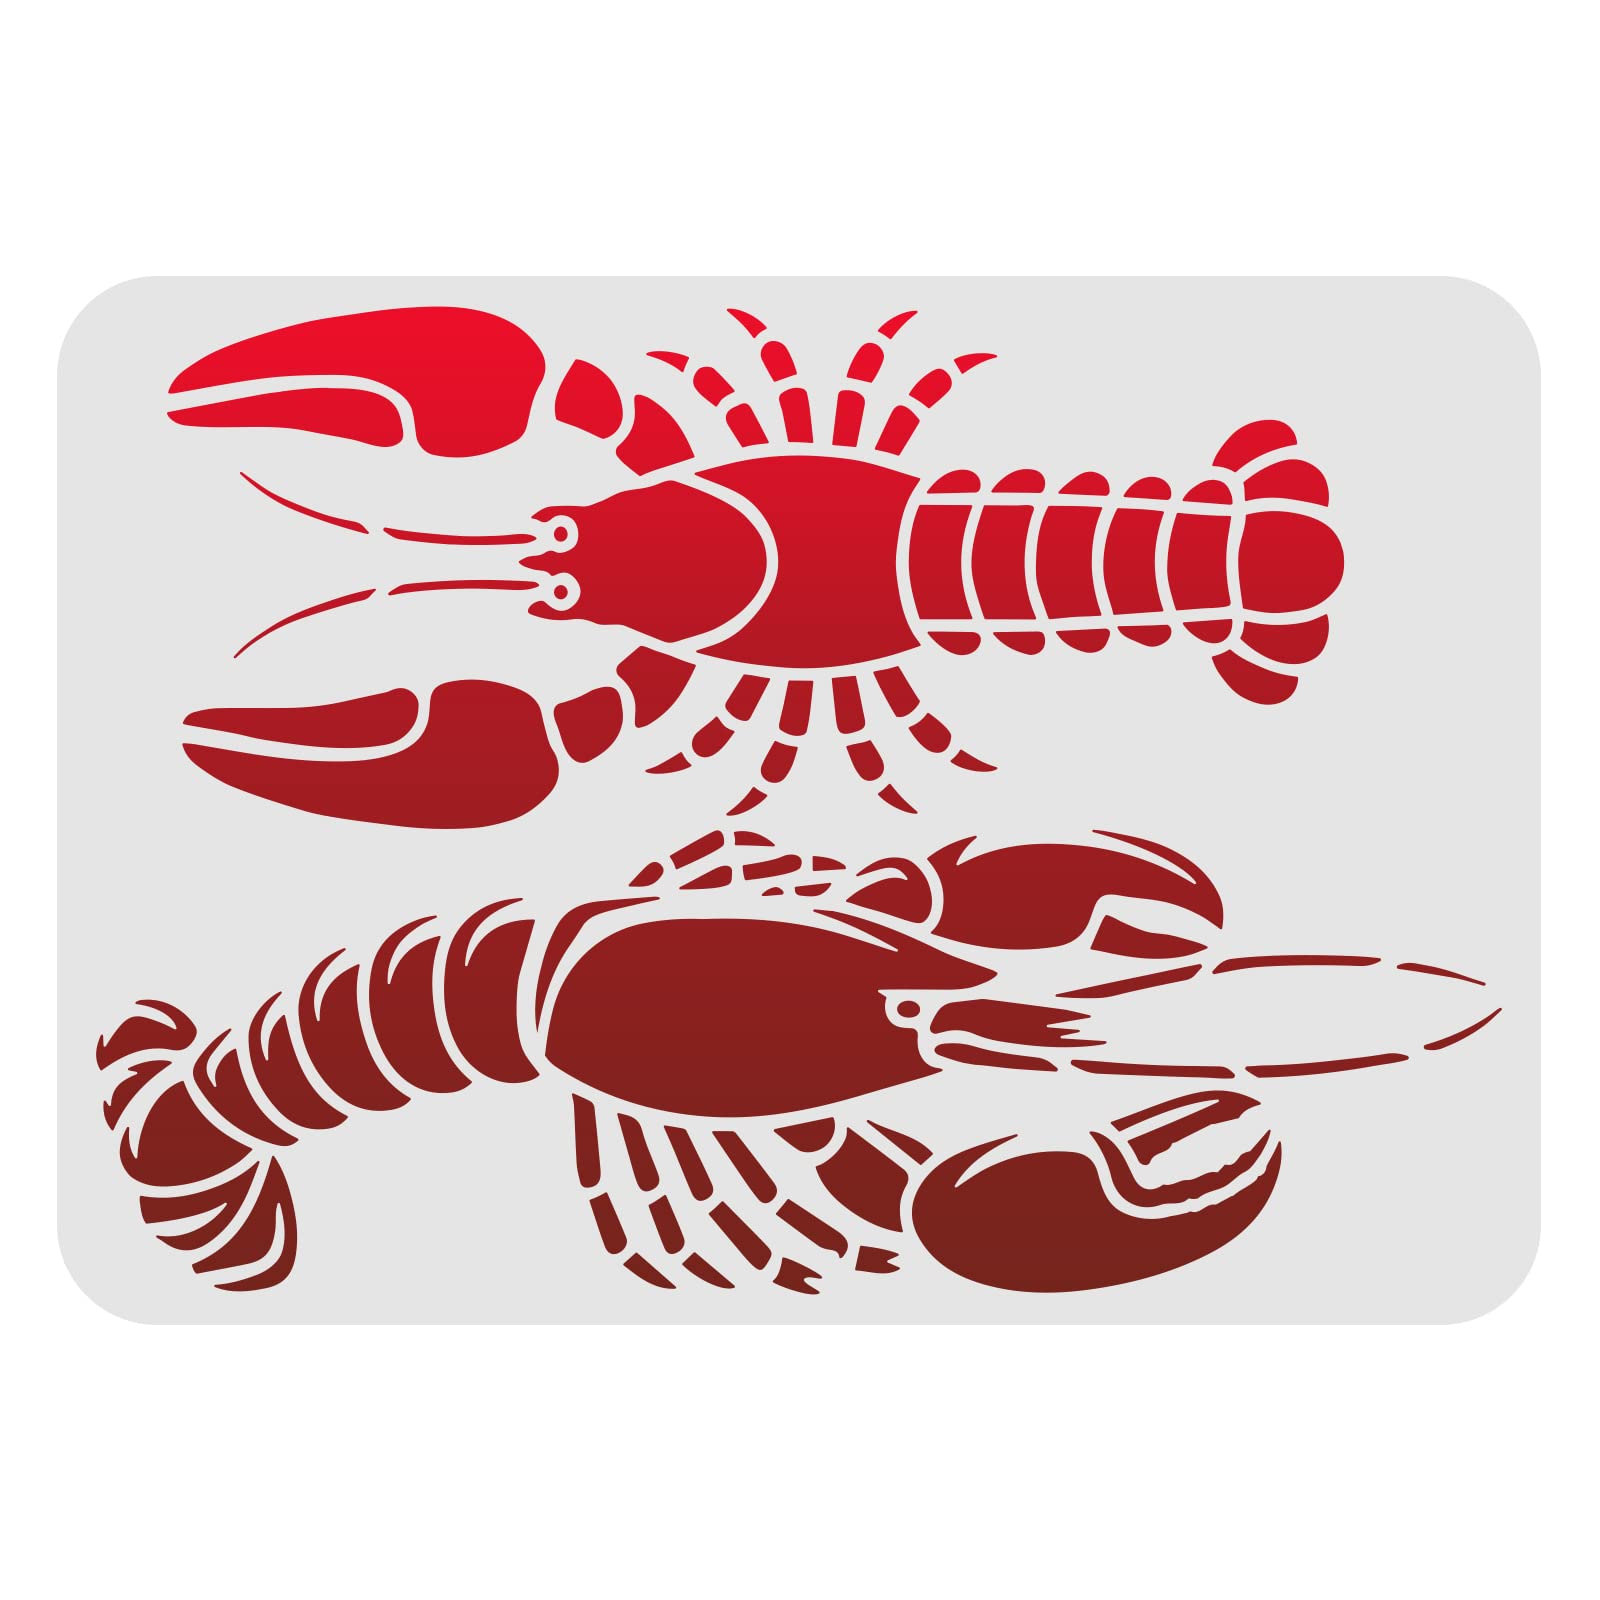 Fingerinspire lobster stencil x inch reusable lobster drawing stencil sea ocean creatures stencils sea animal stencil ocean theme stencil for painting on wood tile floor wall everything else